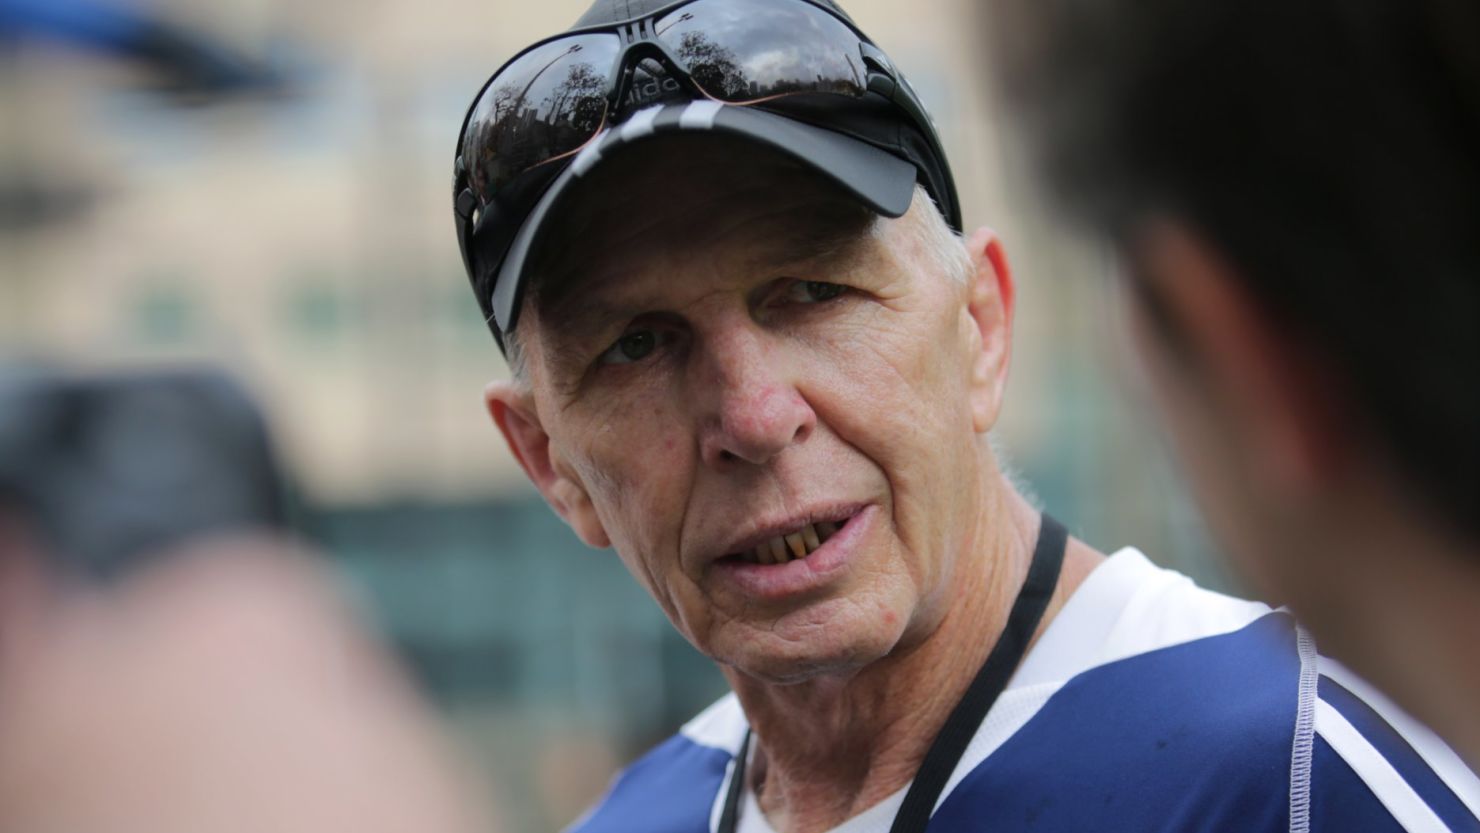 Gordon Tietjens has won more sevens titles than any rugby coach.